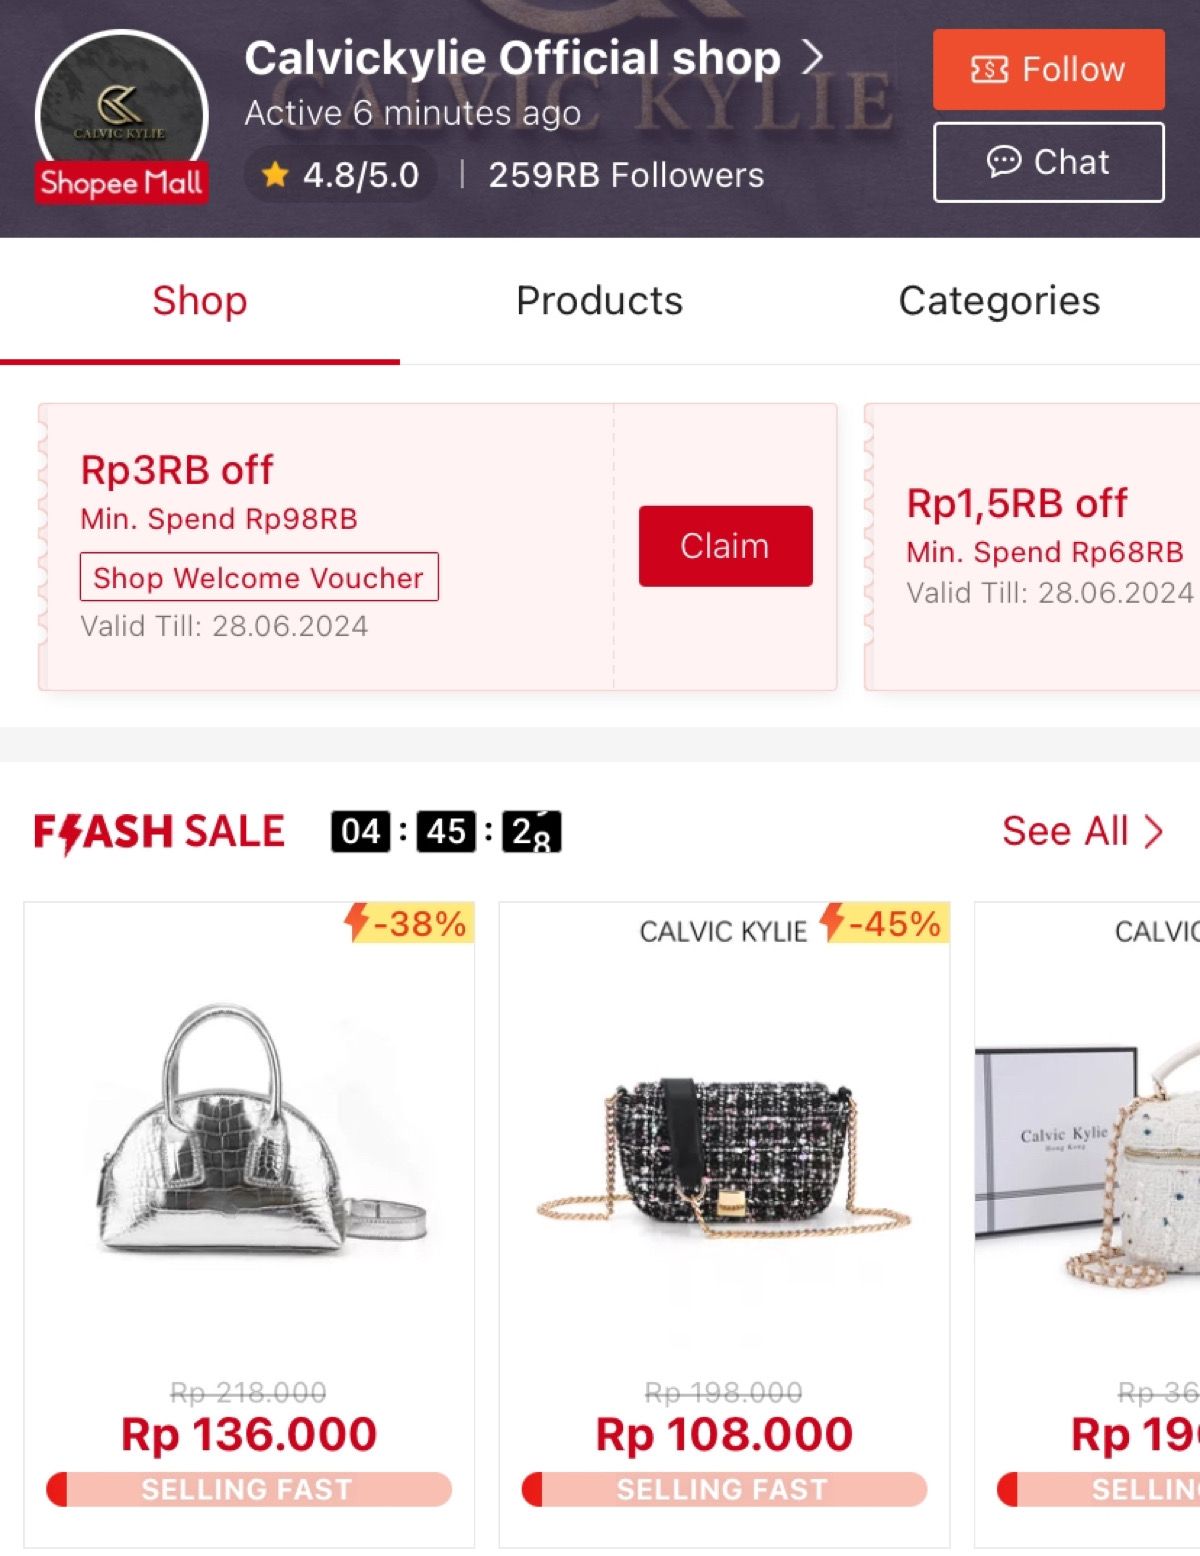 Calvickylie Official Shop di Shopee Mall